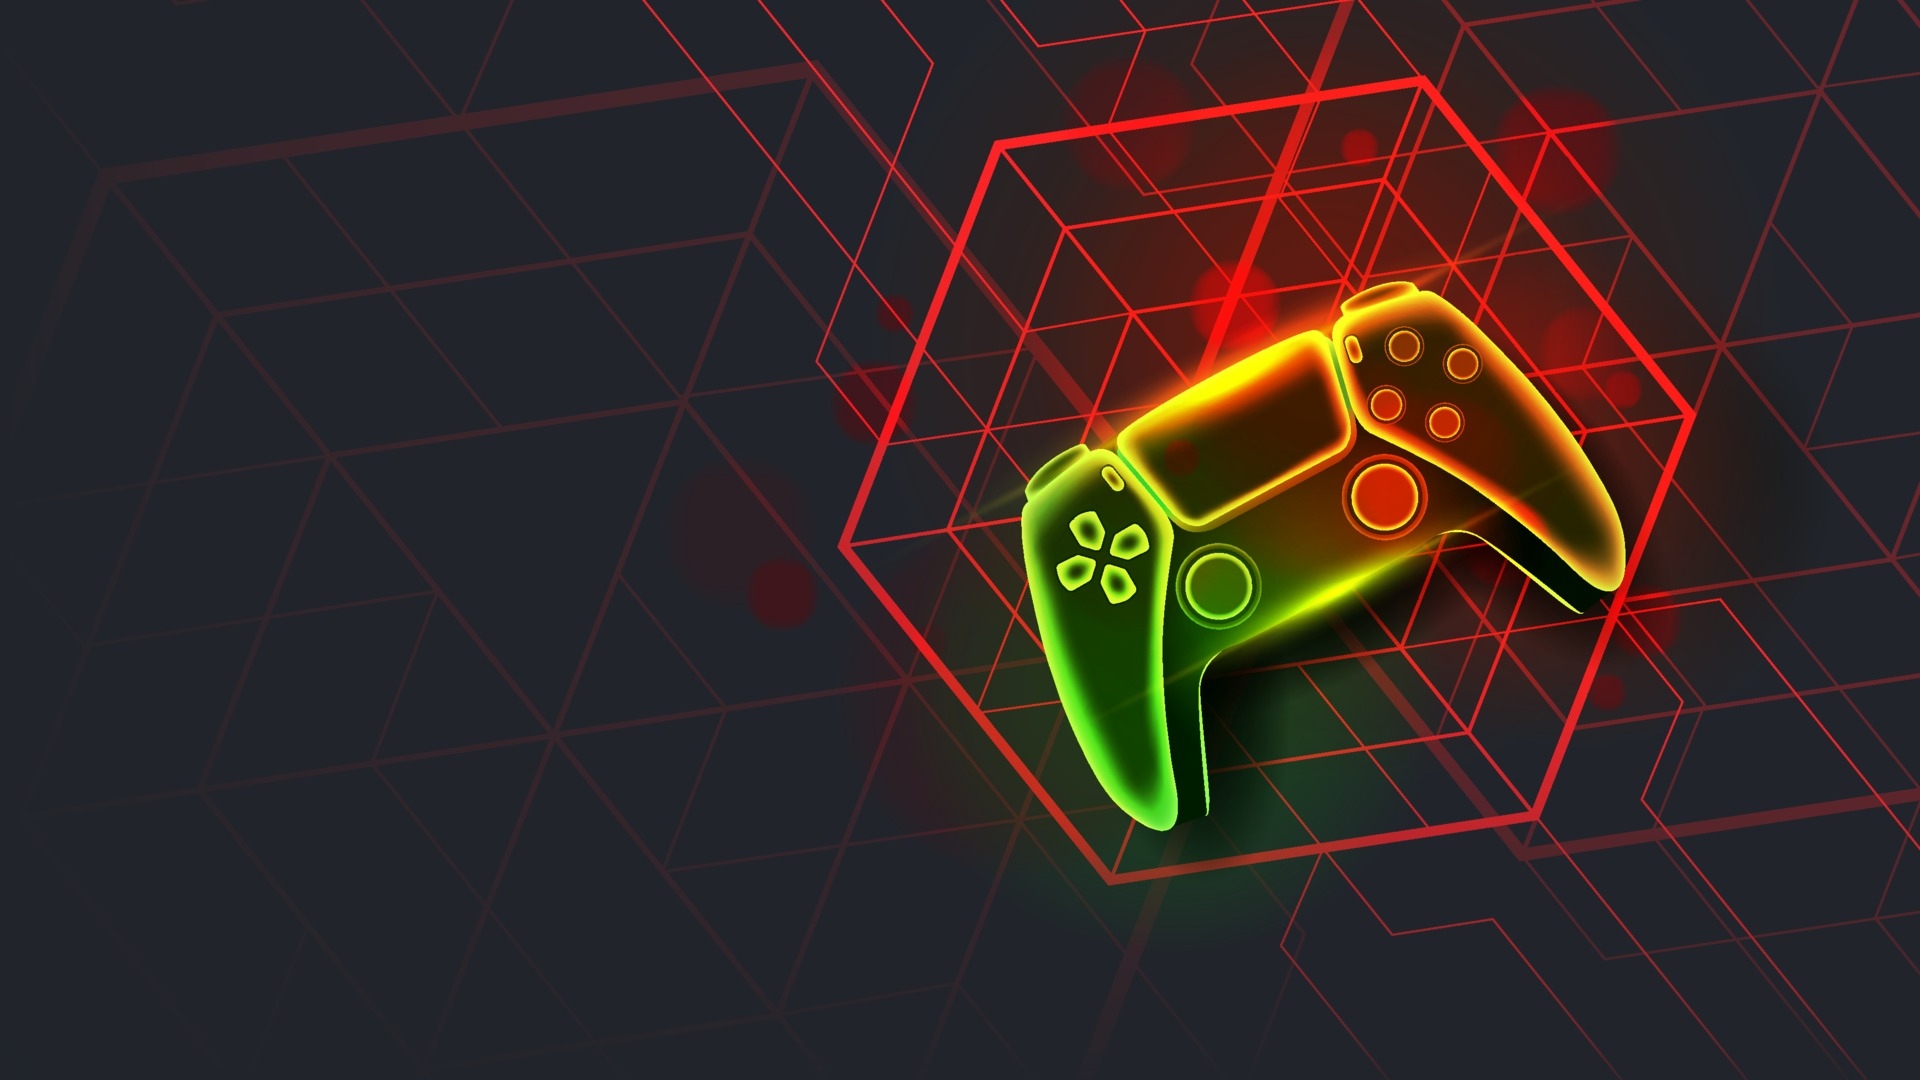 Gampad Controller Background Images